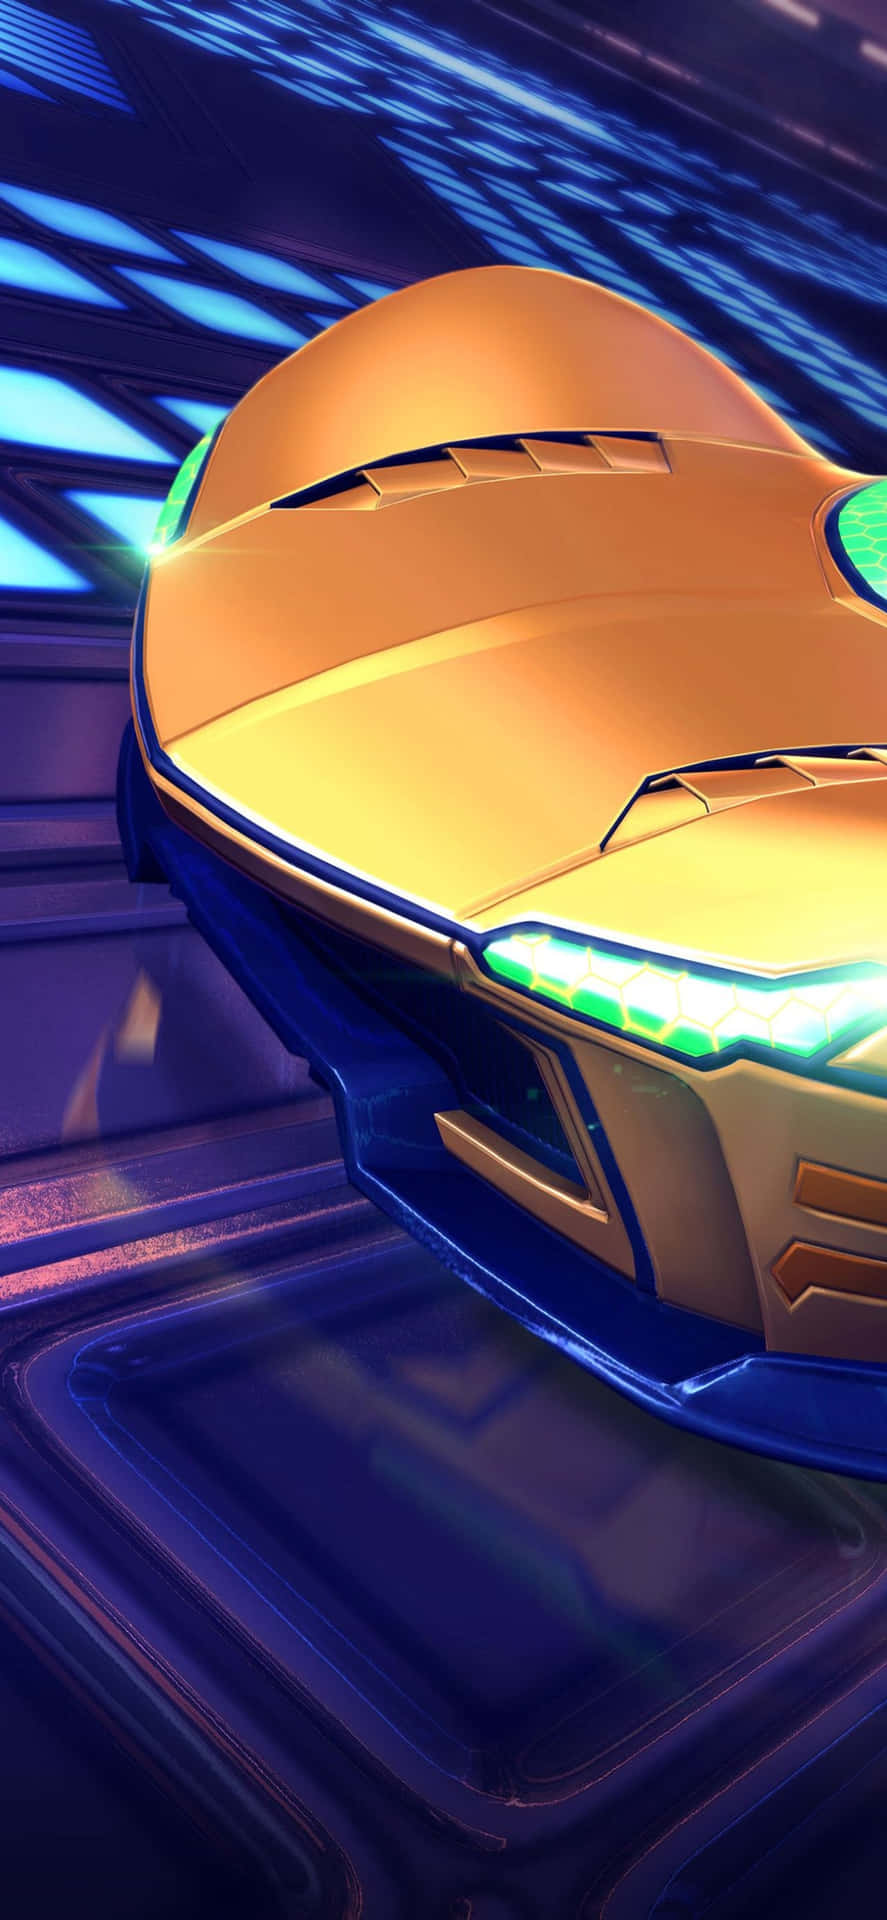 Max Out Your Rocket League Game with the Iphone Xs Max